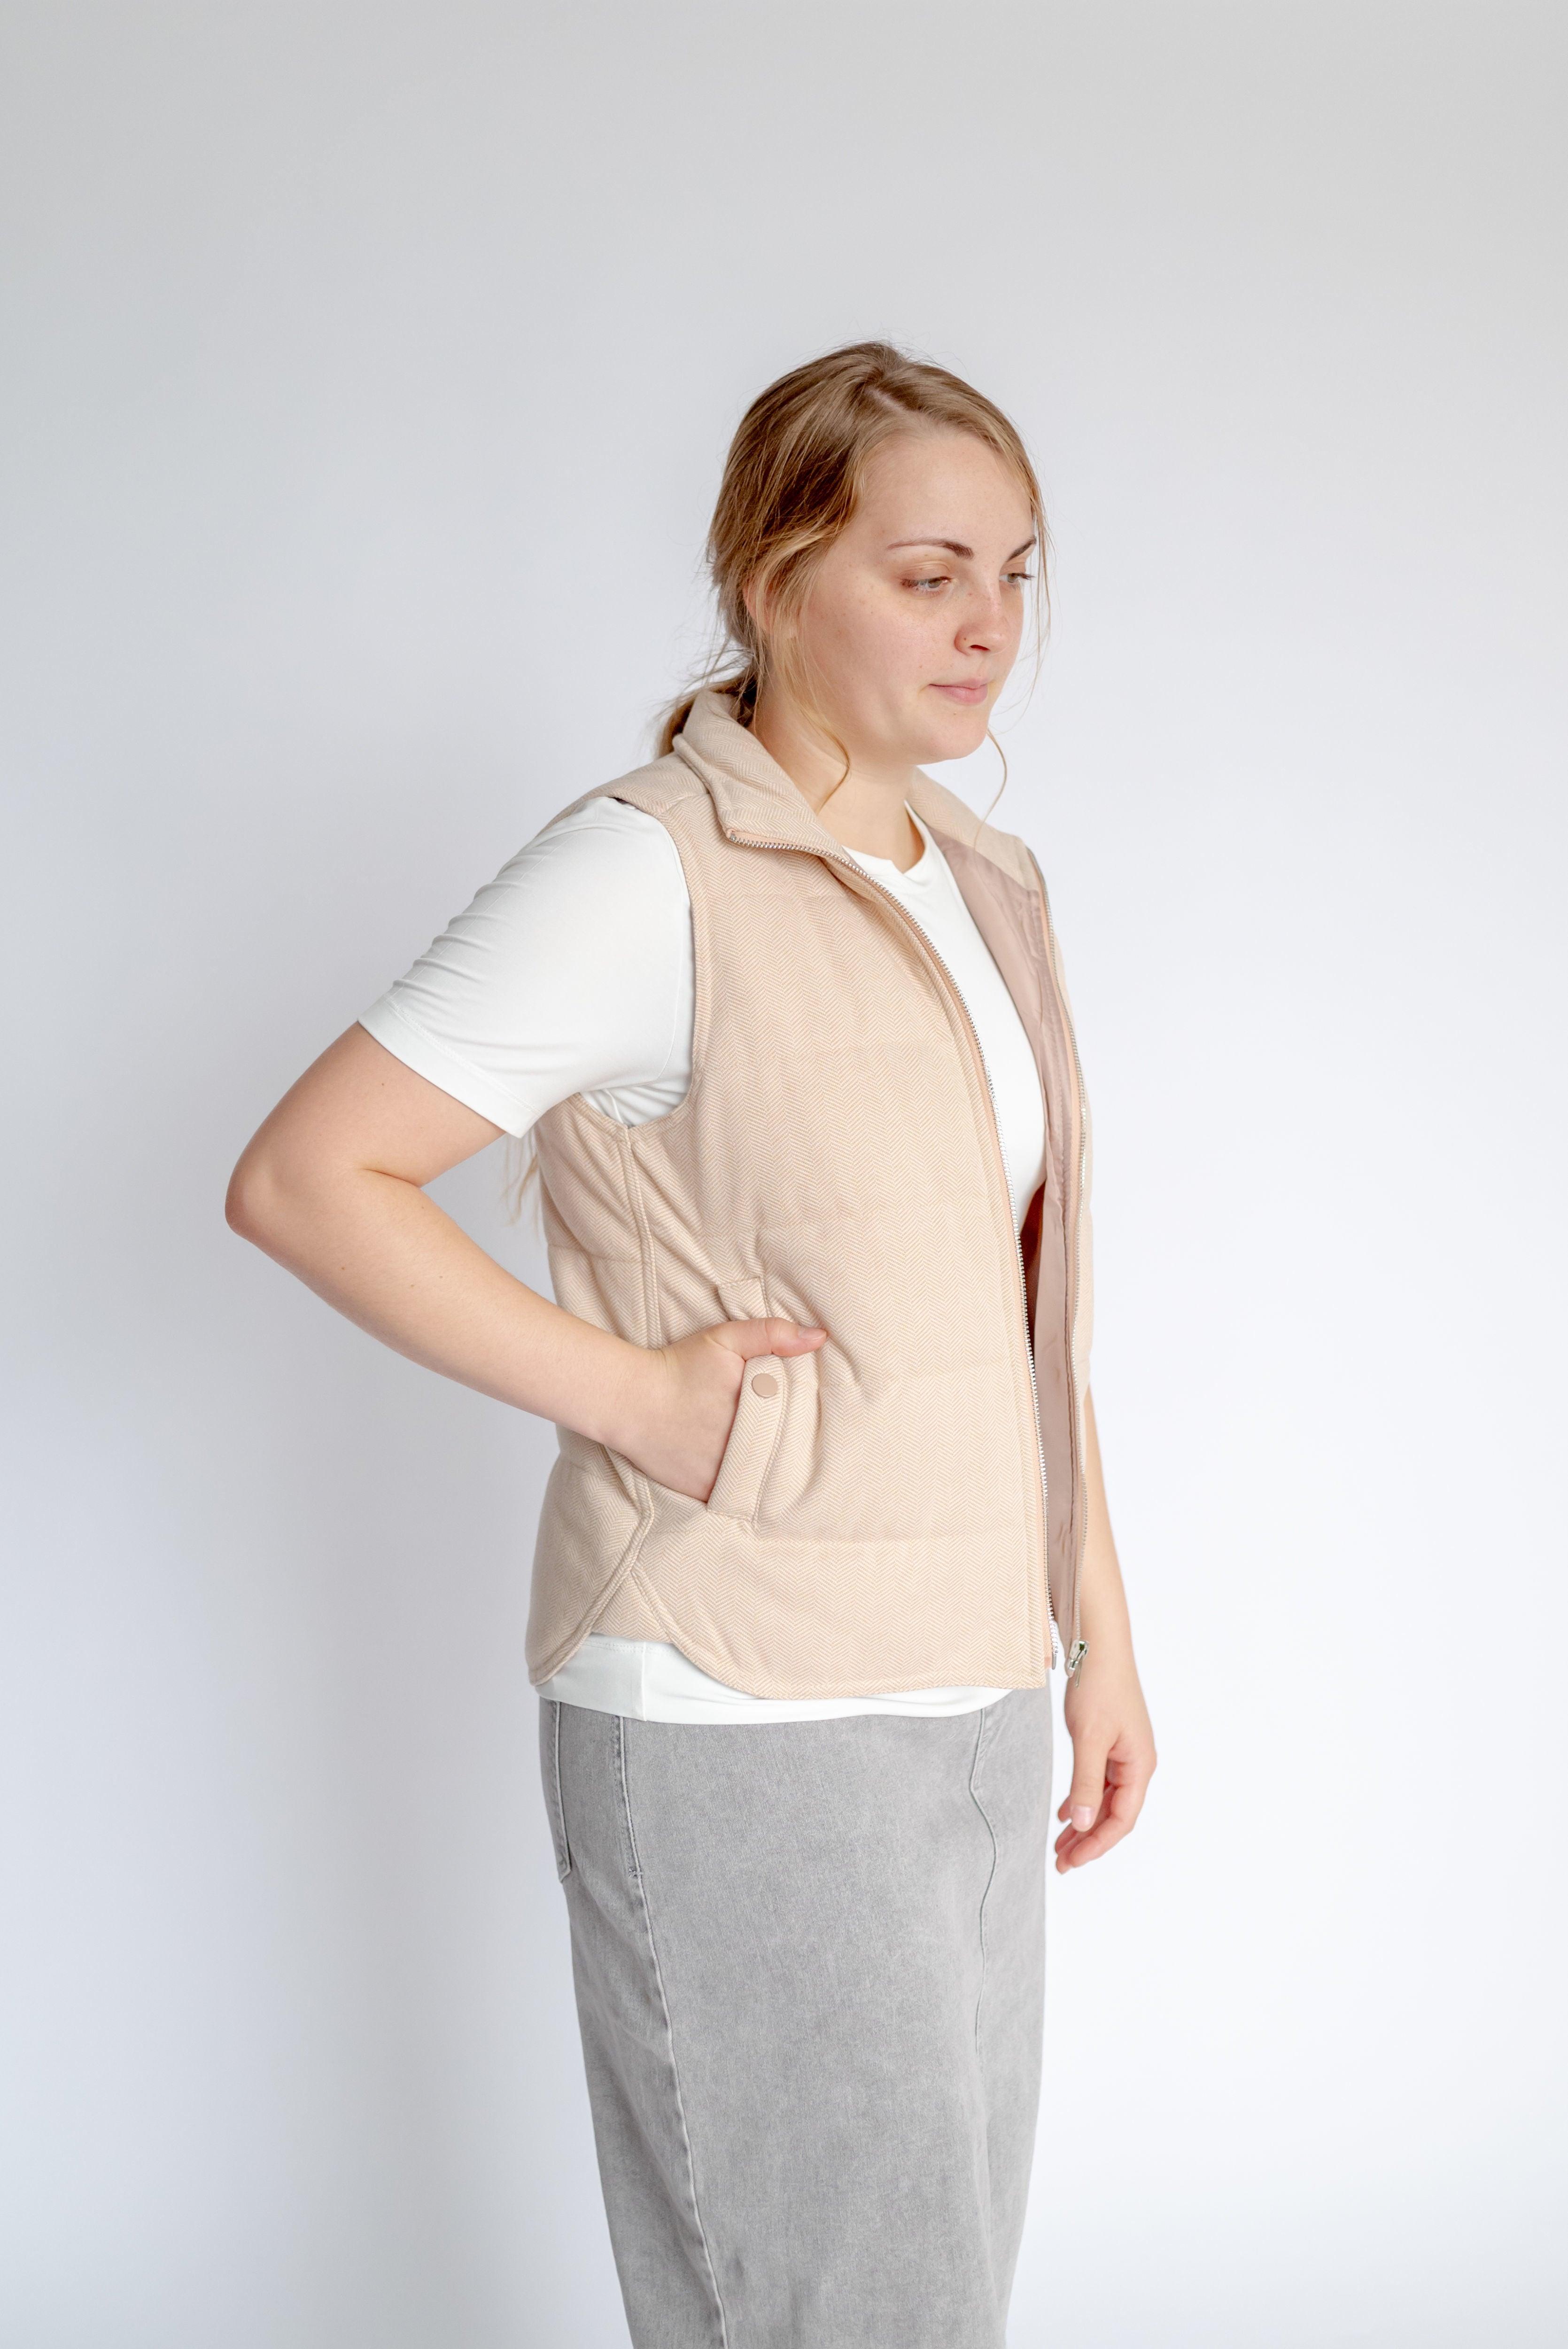 Fiona Vest in Textured Taupe - Fiona Vest in Textured Taupe - undefined - Salt and Honey